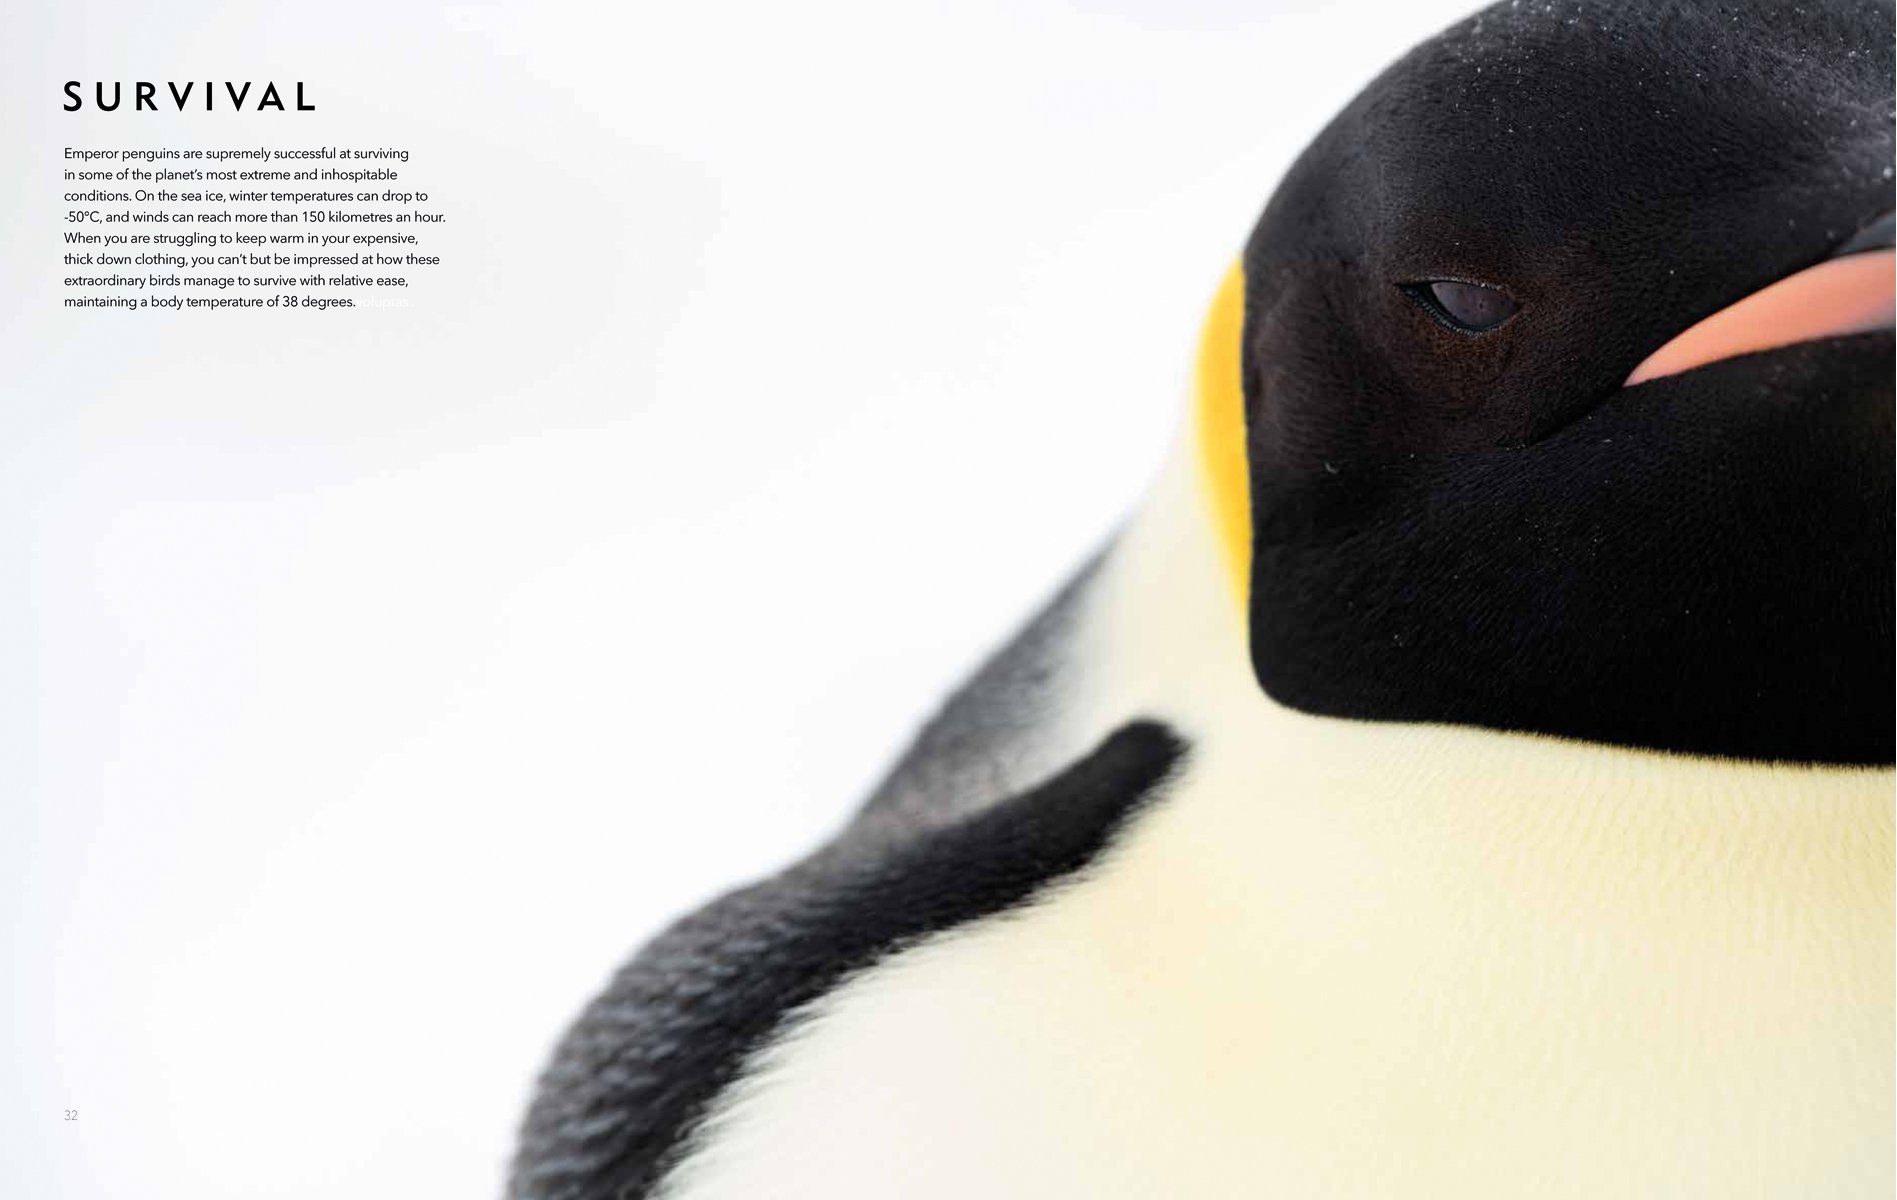 Colour photo of a fluffy penguin chick standing in front of an adult Emperor penguin with Emperor The Perfect Penguin in grey and red capital letters below